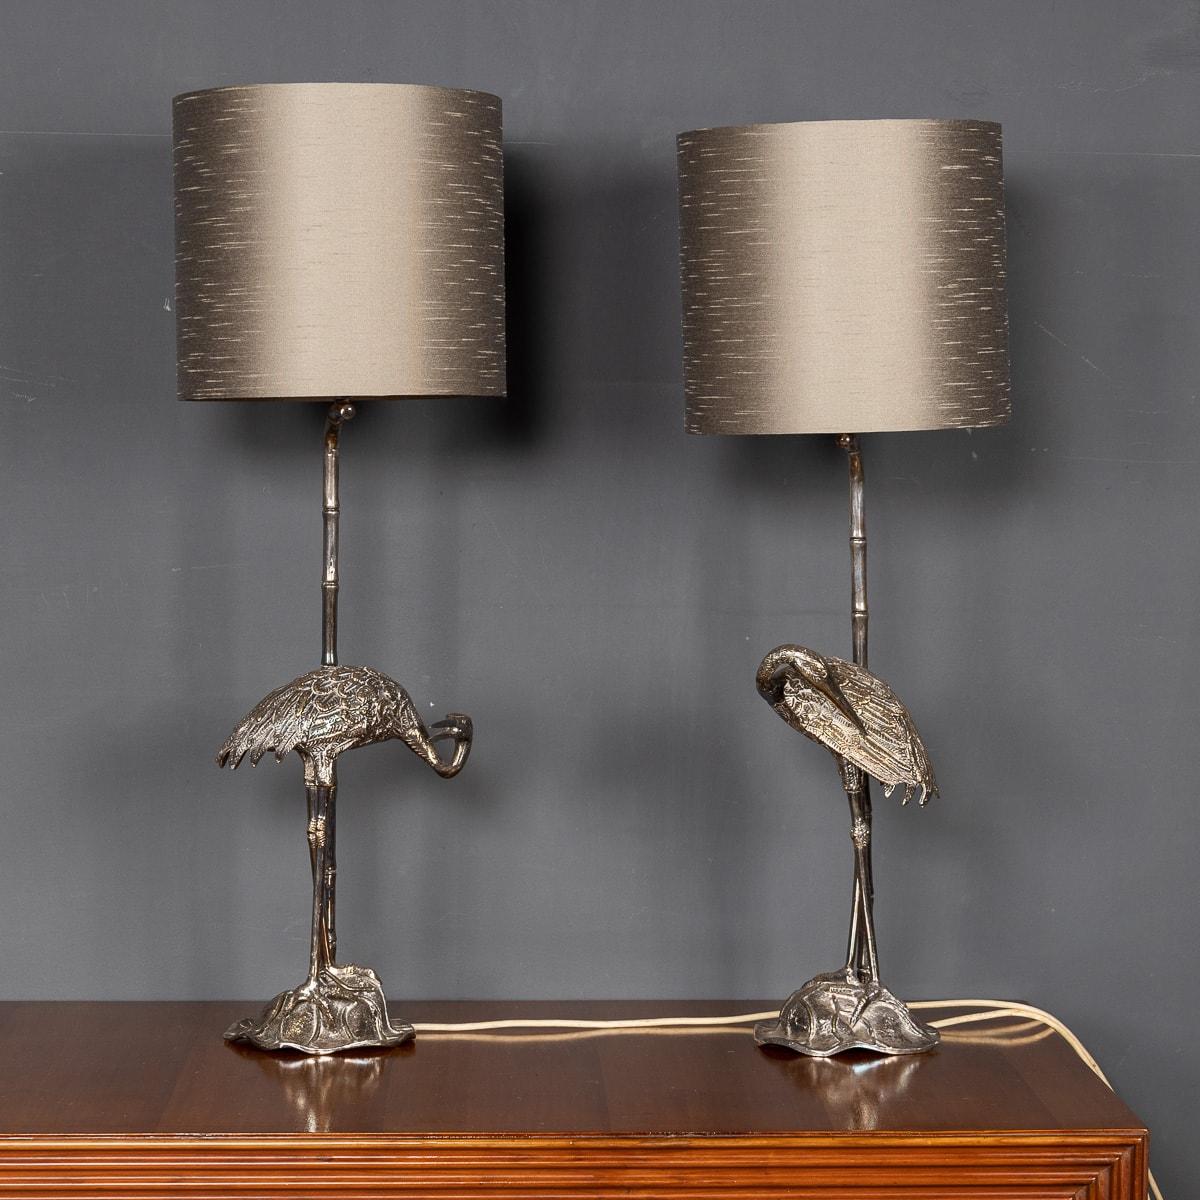 A chic pair of mid 20th Century silver plated lamps, designed by the renowned Spanish designer Valenti. A beautifully crafted base supports the bamboo shape stem, with an integrated crane bird that is the showpiece of the lamp. These lamps offer a